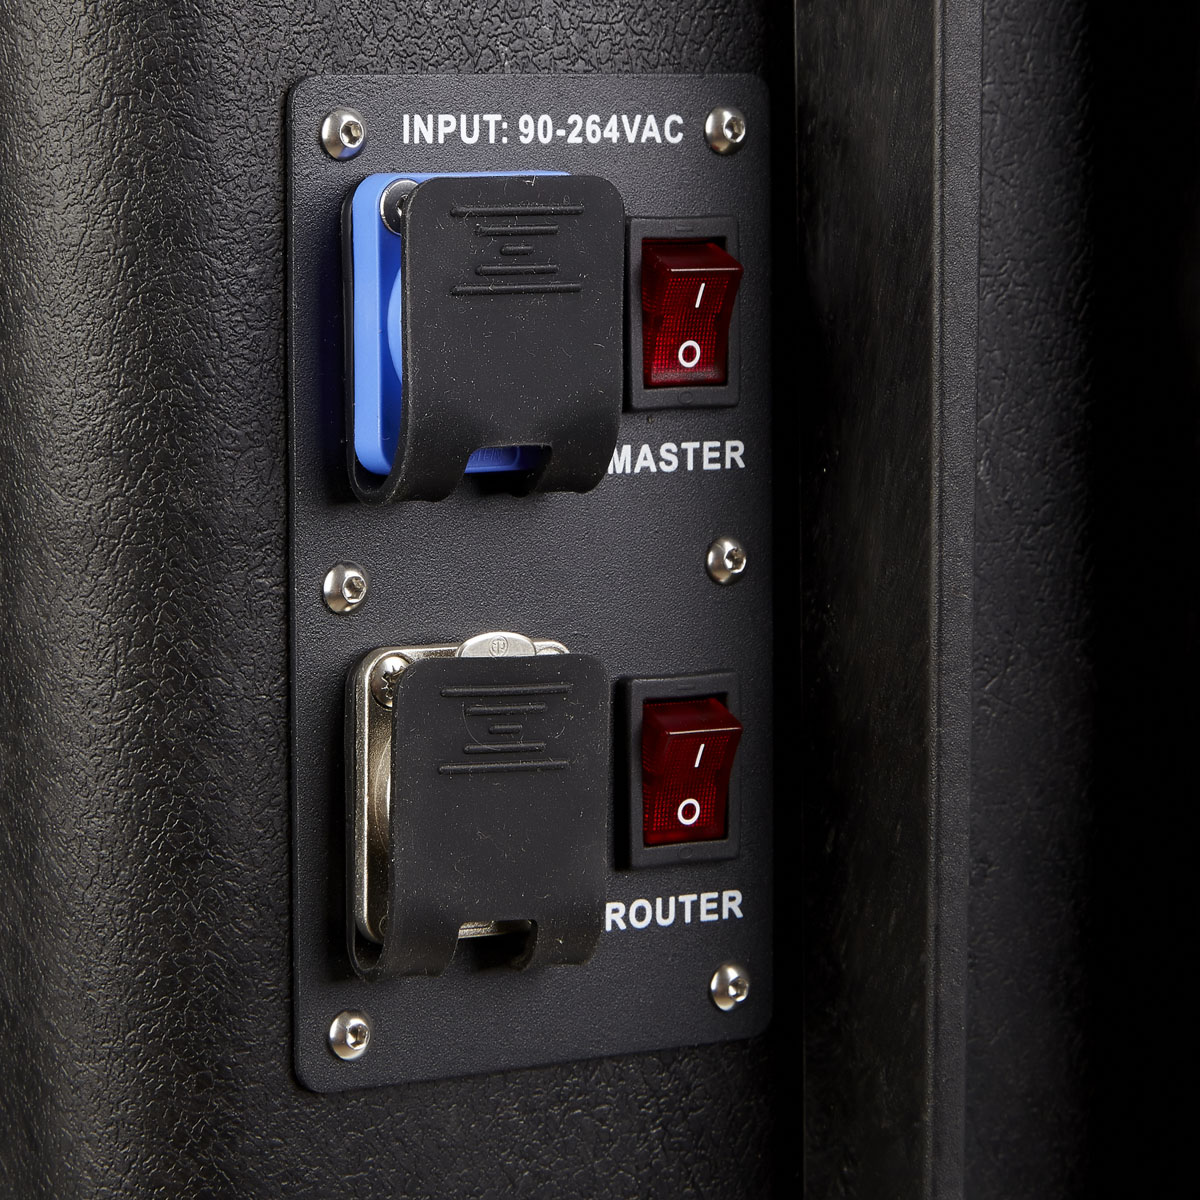 DEQSTER KT16C PD Details Switch and Plug